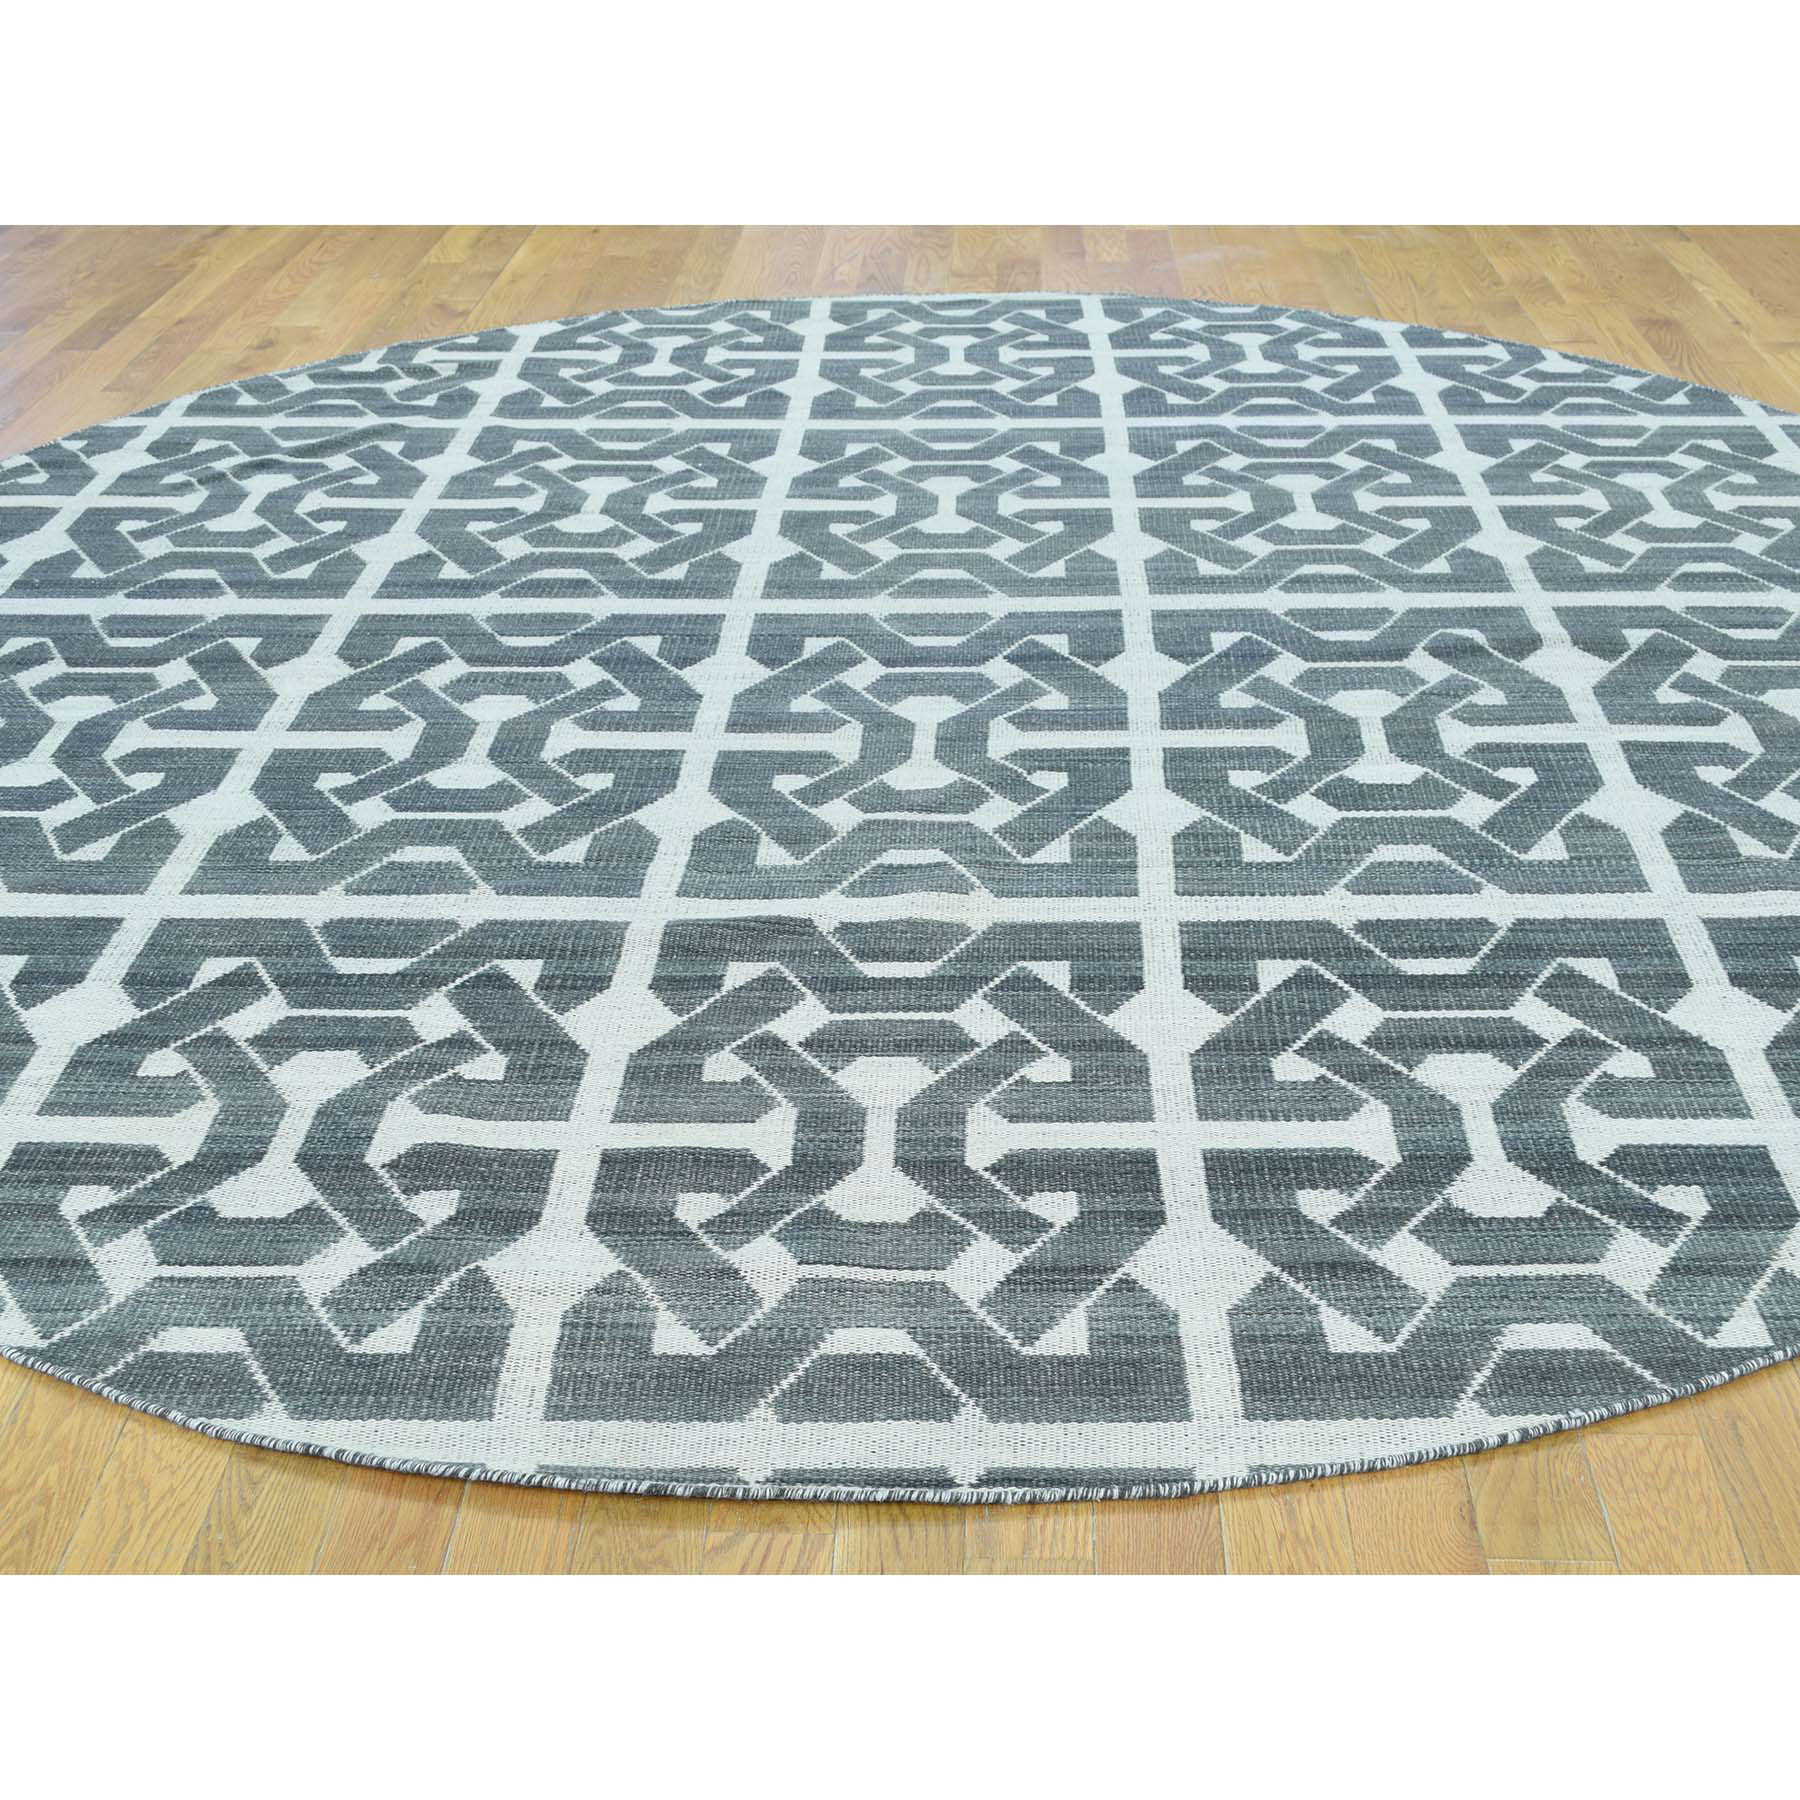 9-10 x9-10  Hand Woven Flat Weave Durie Kilim Reversible Round Rug 